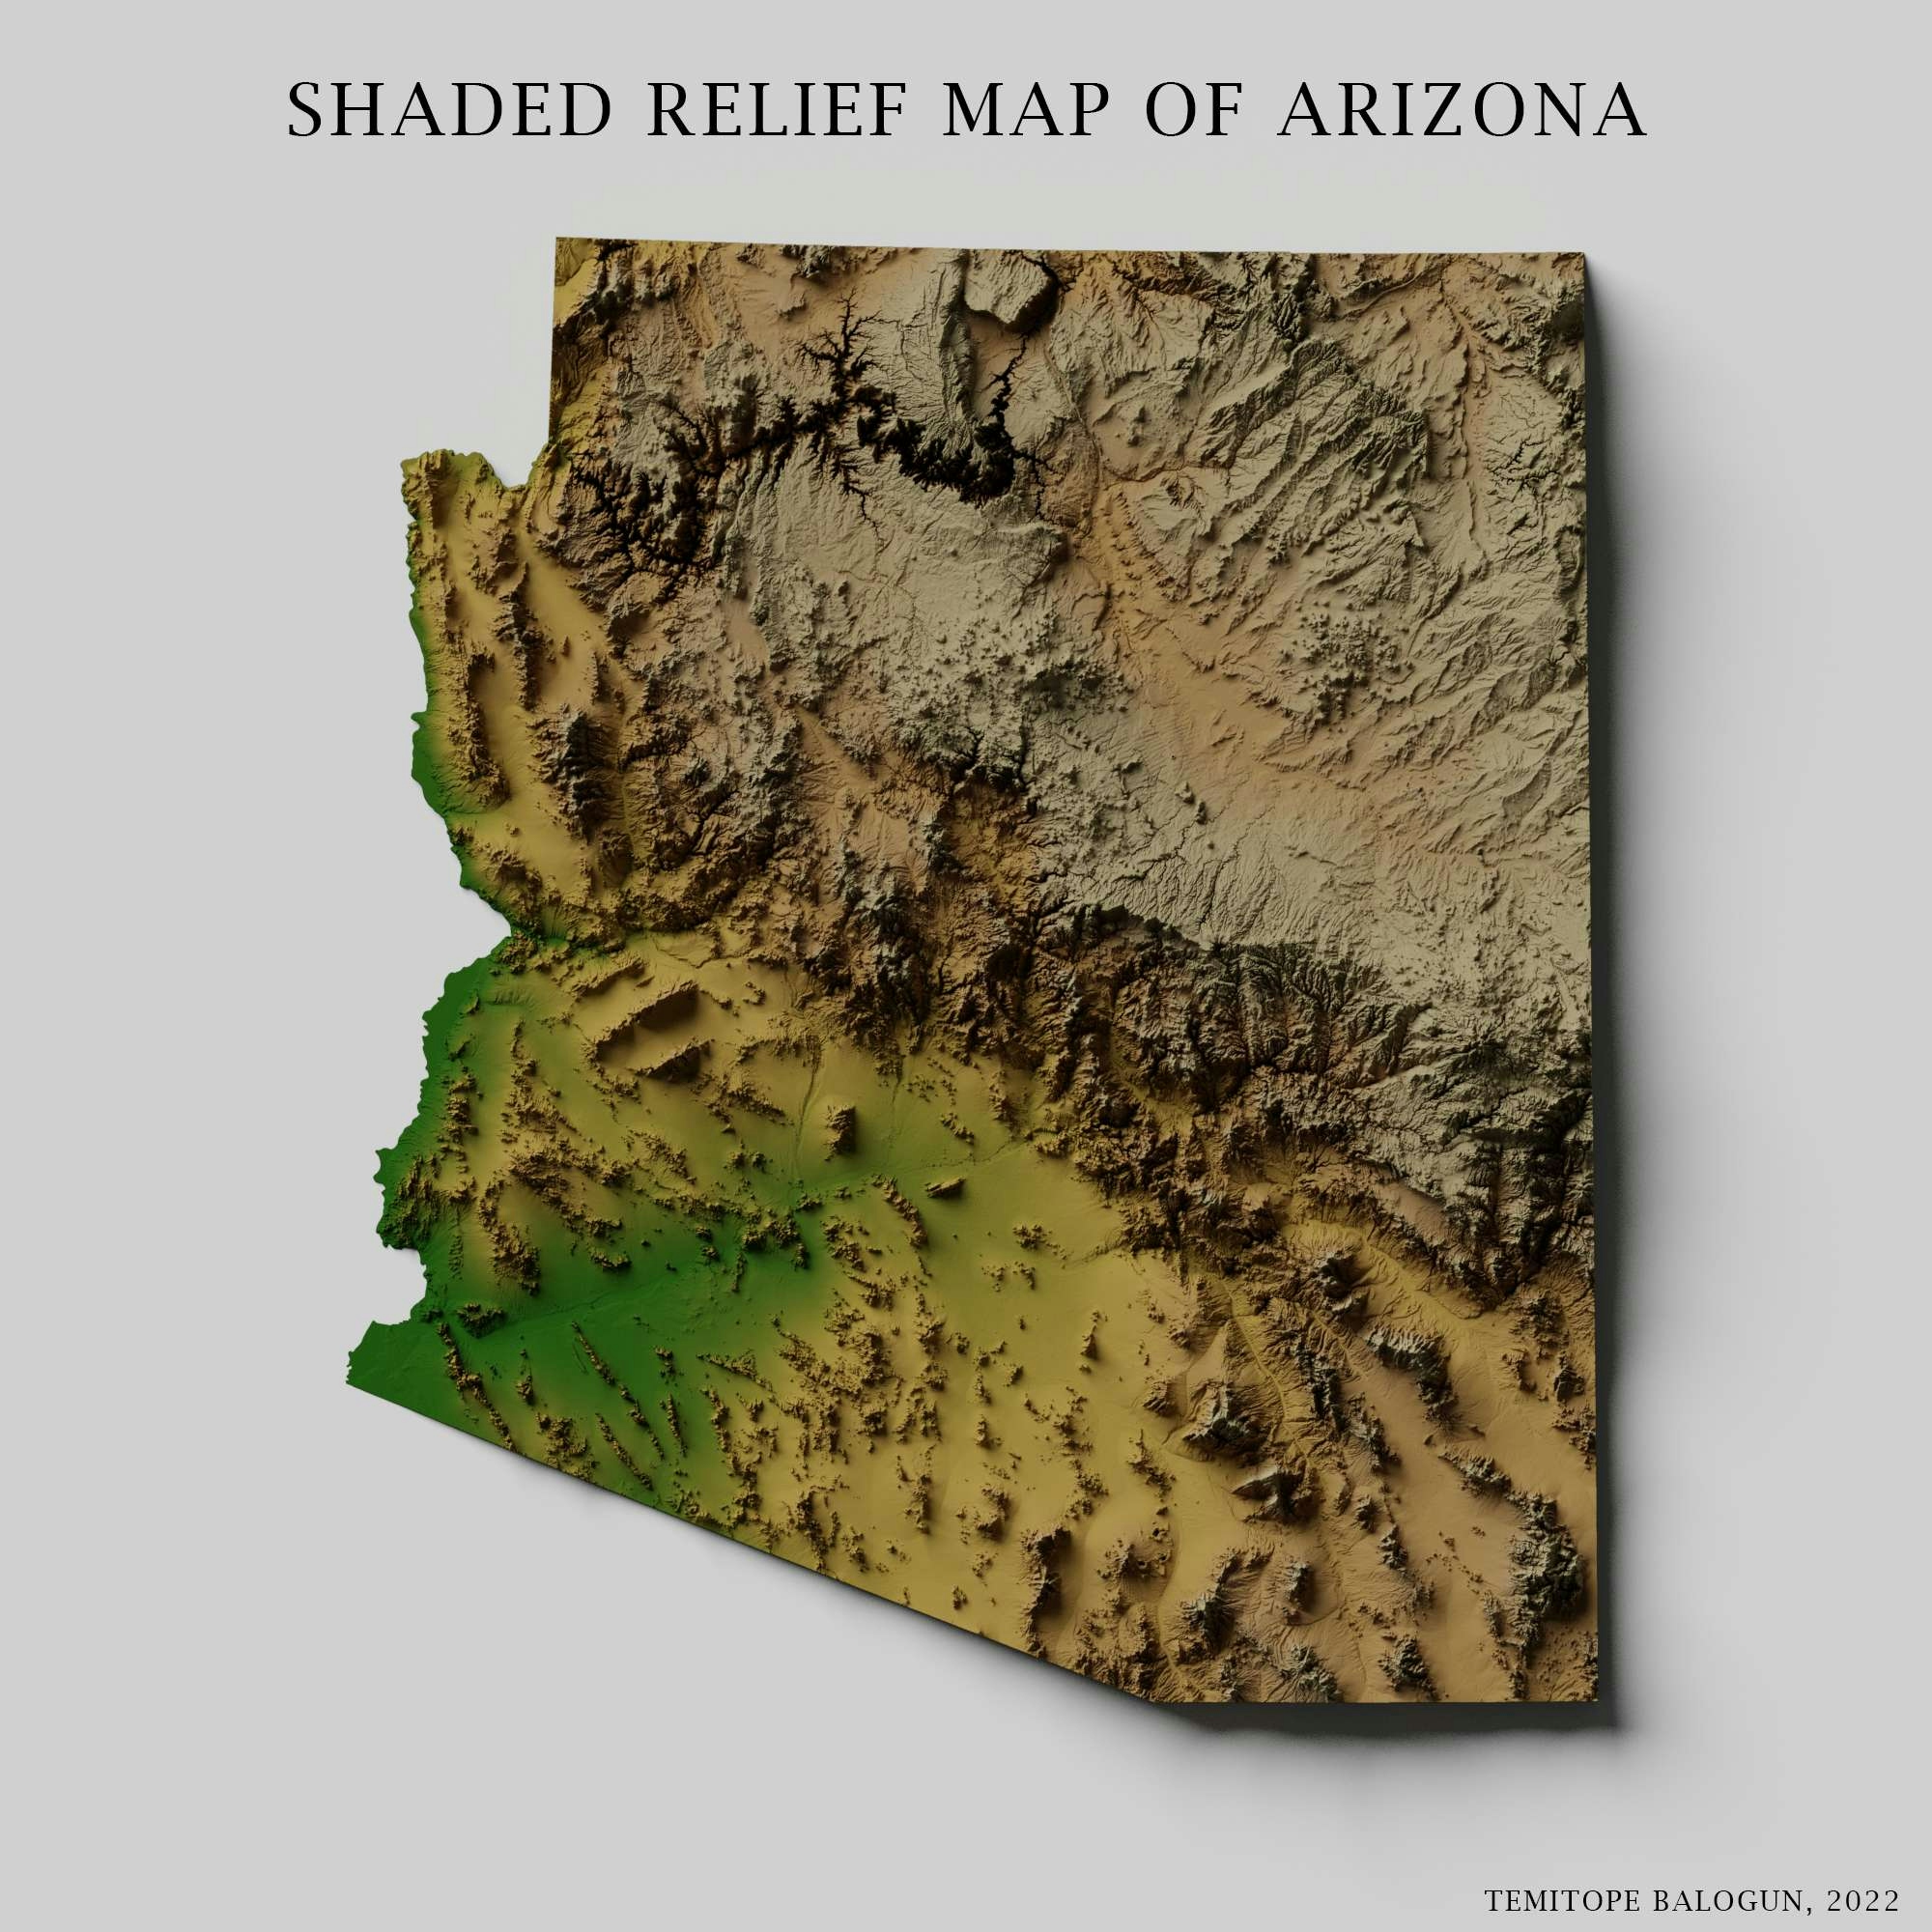 Shaded relief map of Arizona